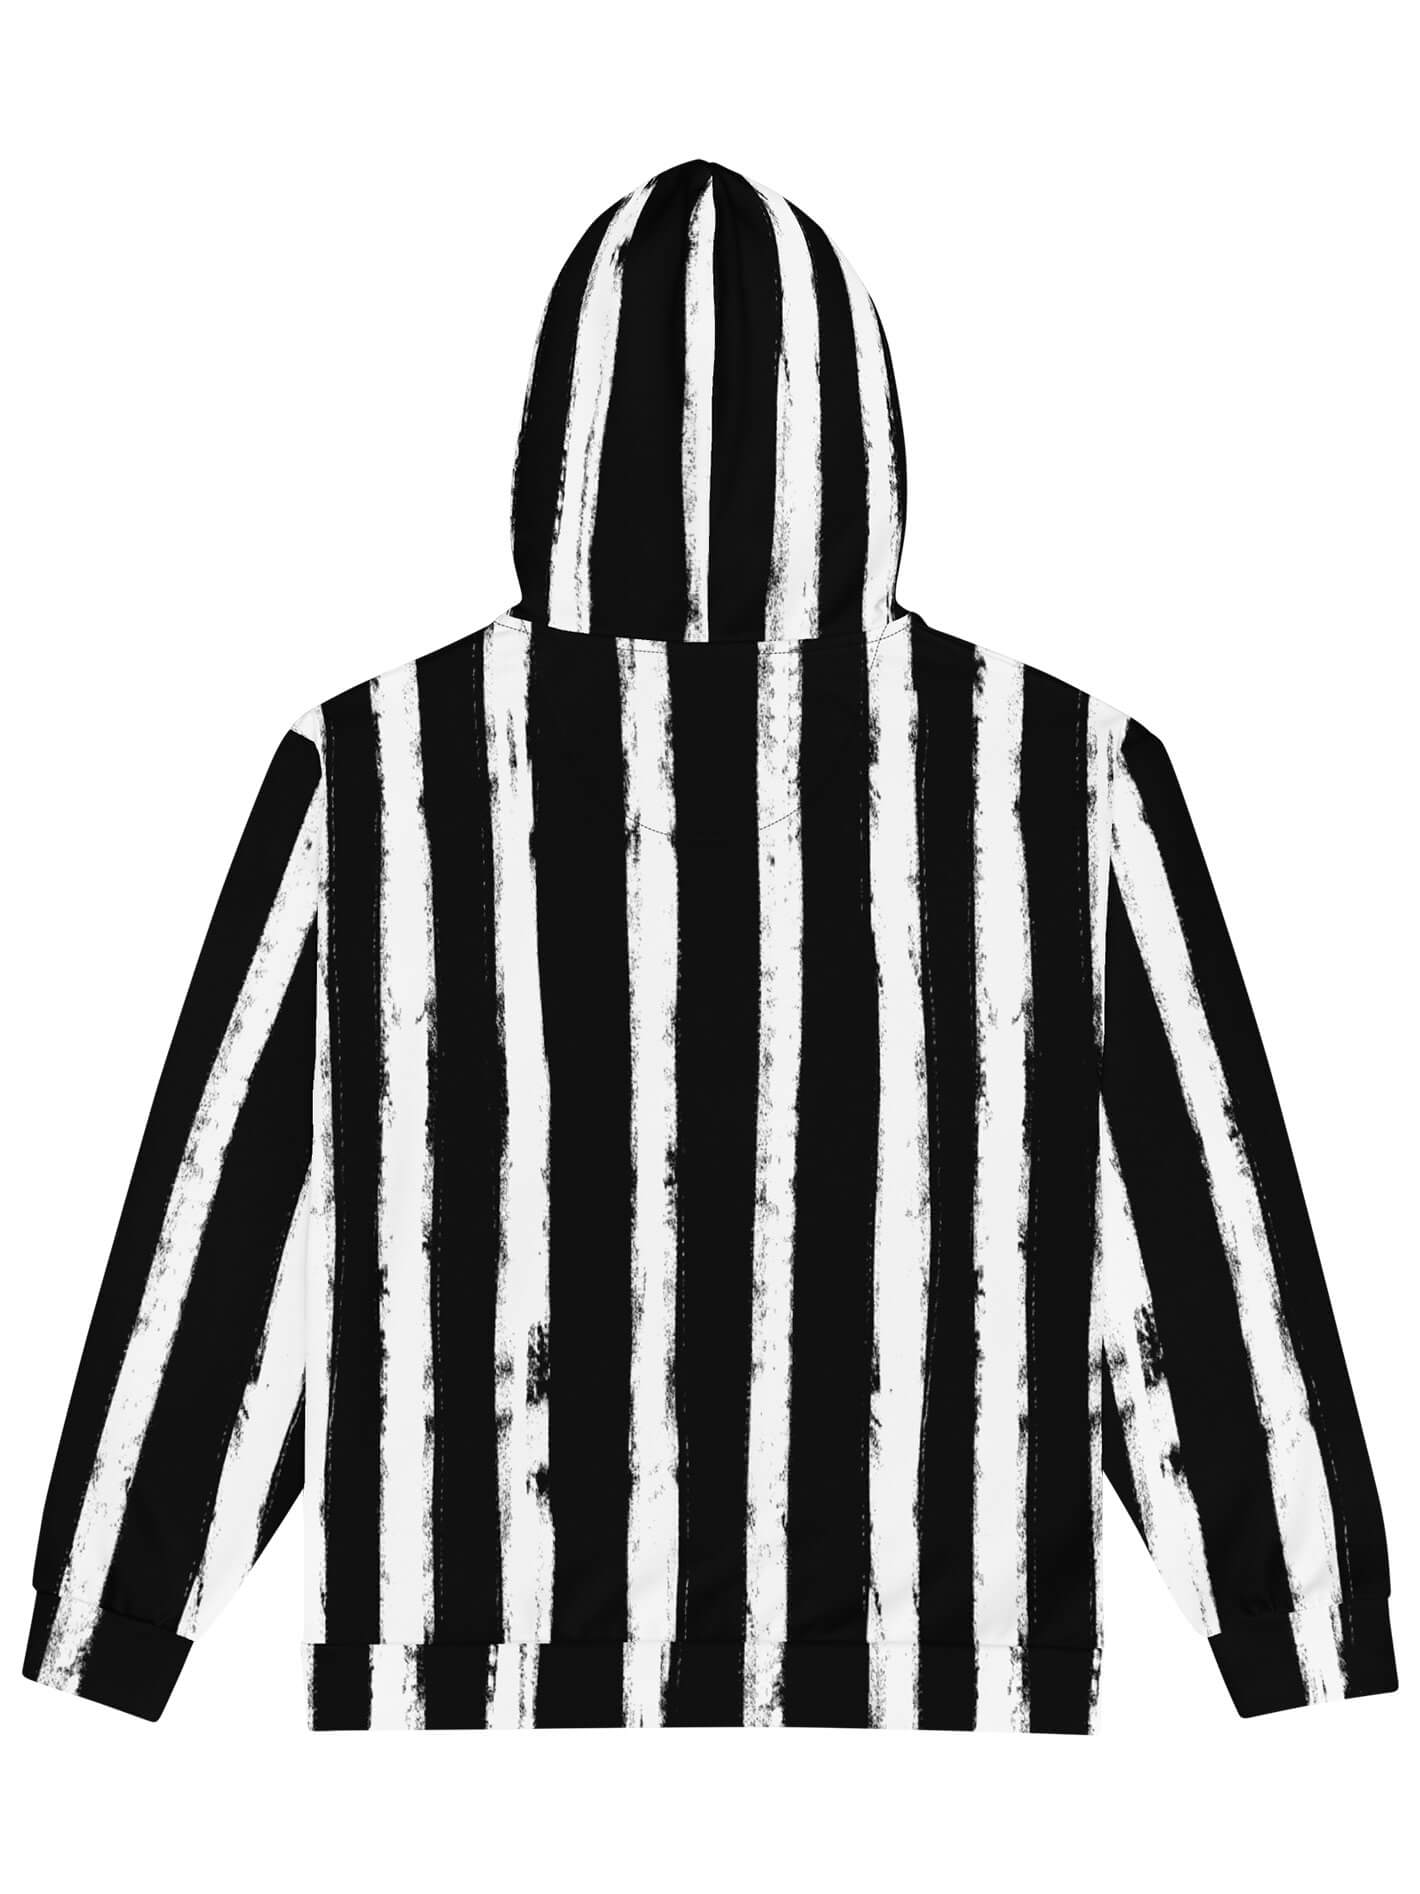 Black and white striped plus size hoodie.